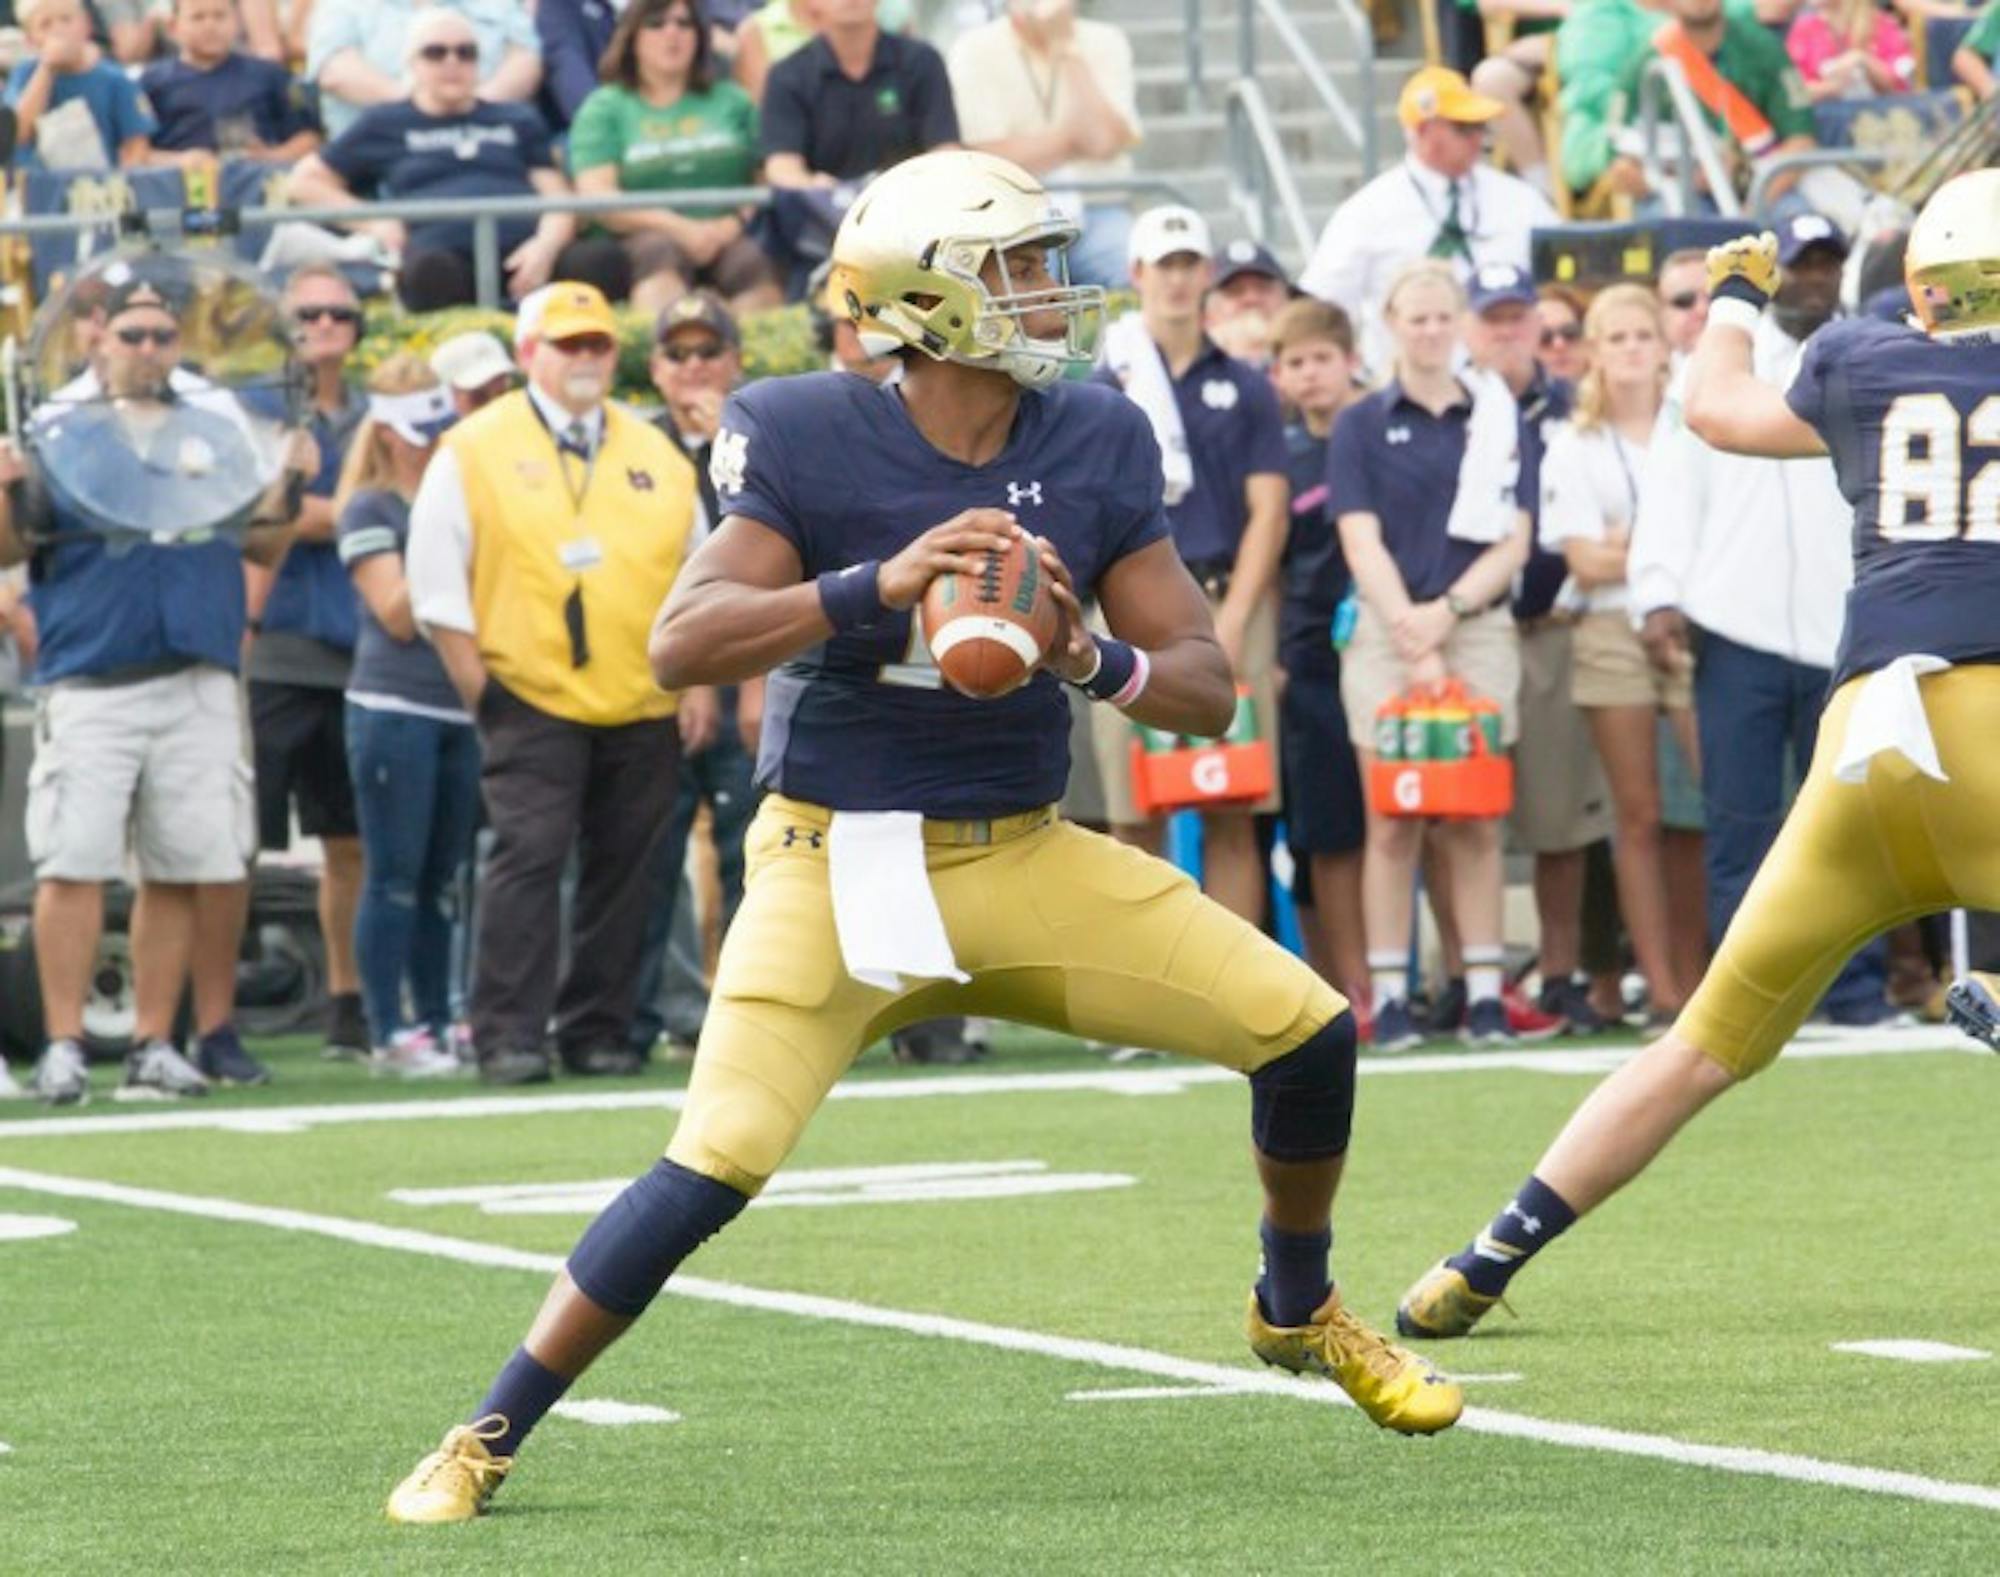 Irish freshman quarterback Brandon Wimbush scores a touchdown during Notre Dame’s 62-27 win over Massachusetts on Saturday at Notre Dame Stadium. Wimbush had four carries for 92 yards in the game.